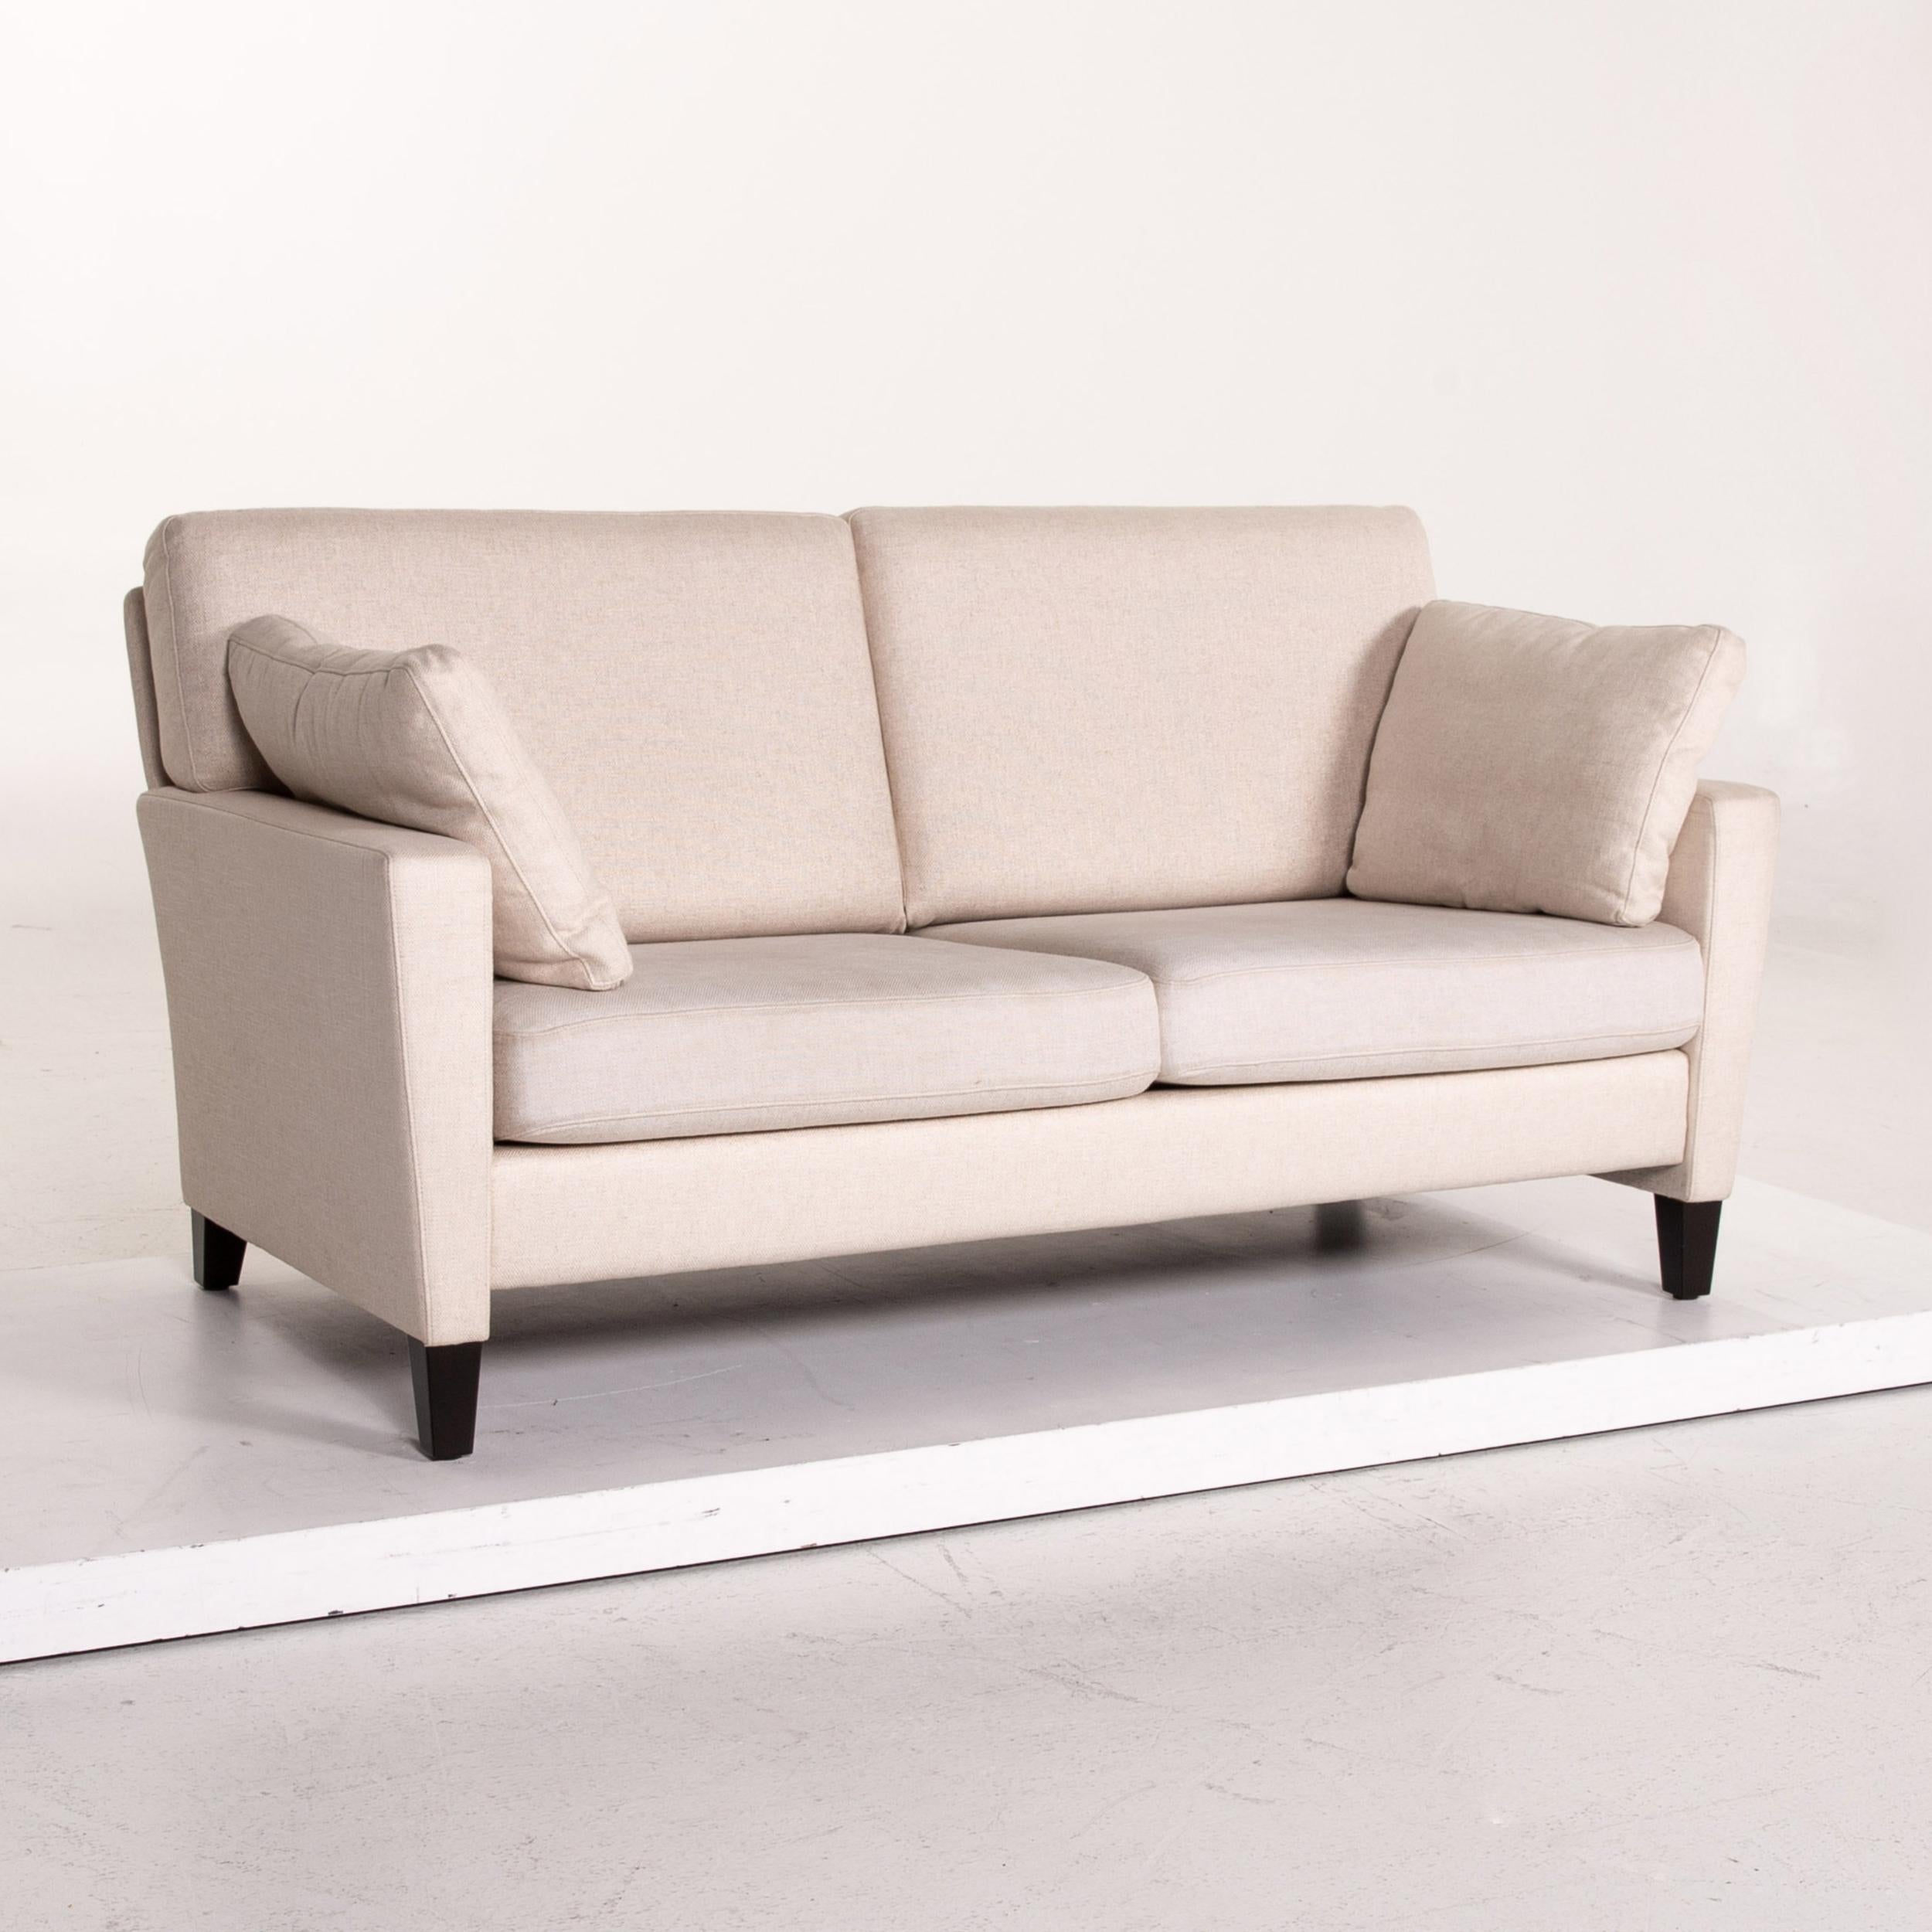 Walter Knoll Henry Fabric Sofa Cream Two-Seat Couch 1